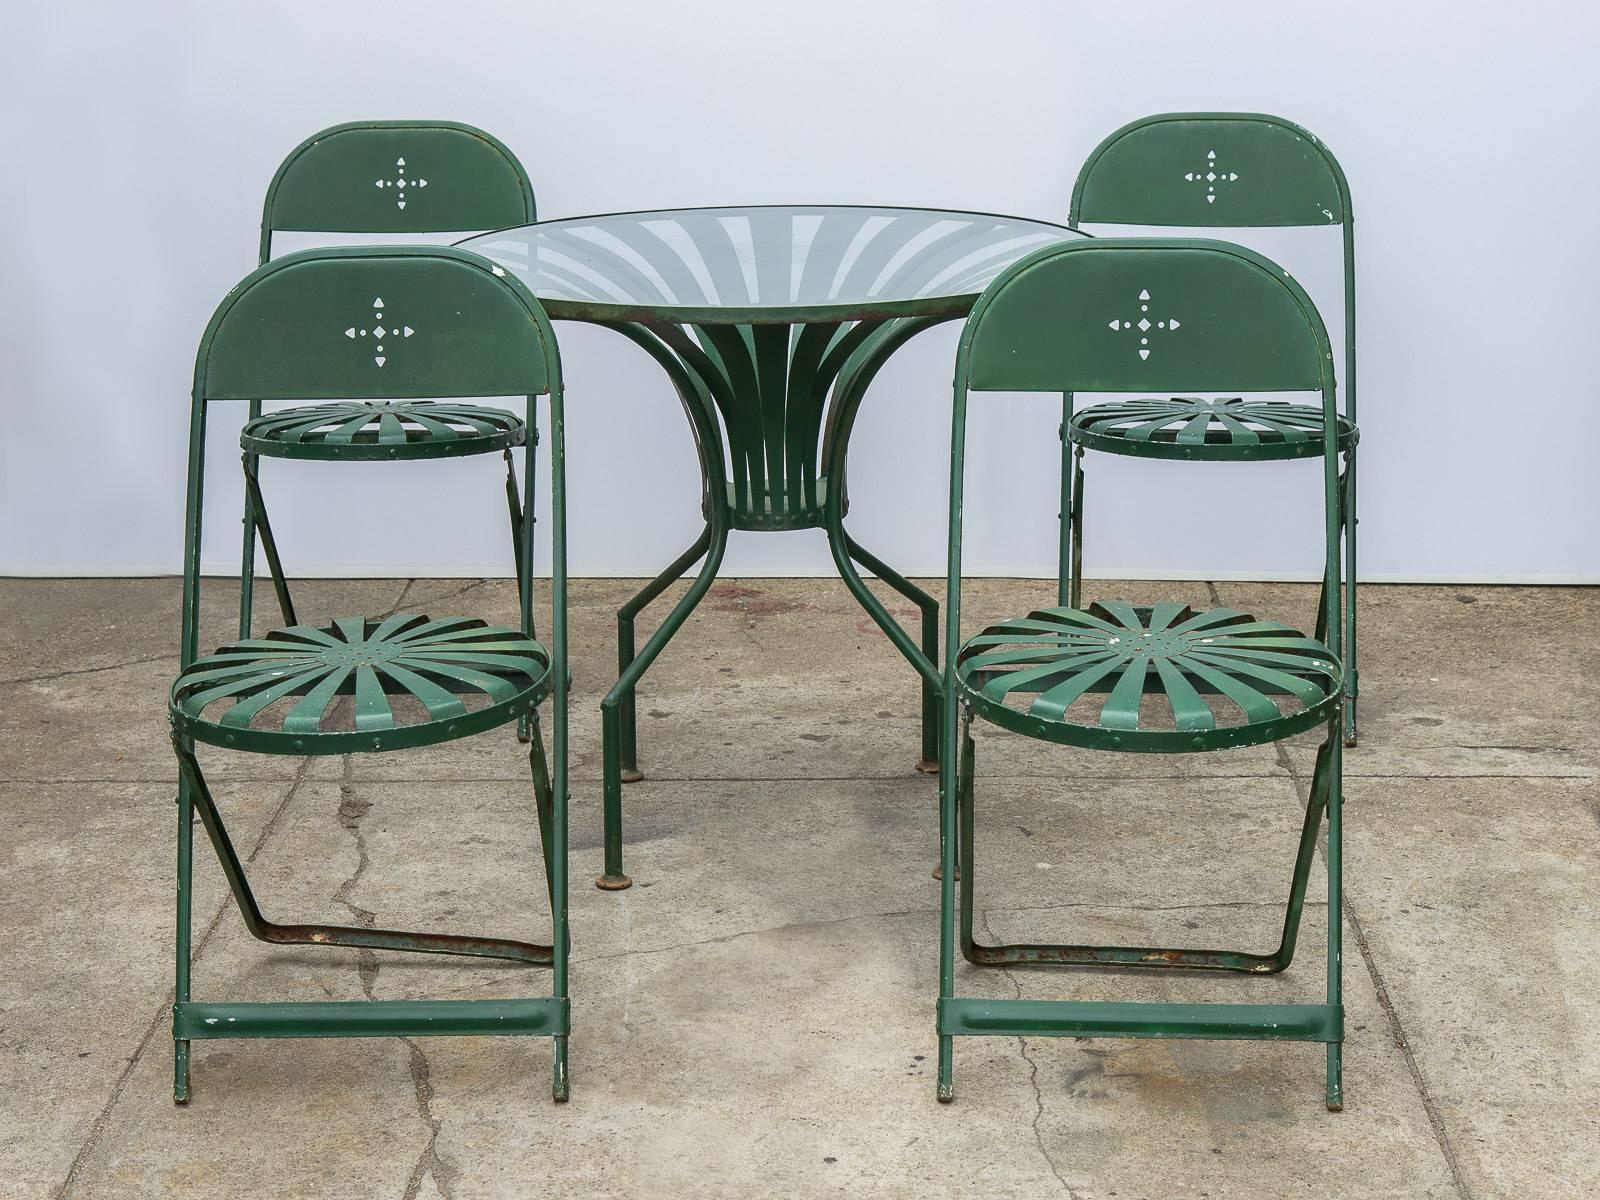 Four cut-out wrought iron folding chairs and glass table in green enamel. This set is in the style of Francois Carre's, 1930s Sunburst outdoor furniture featuring the same sunburst seats and table base form. All pieces are in good vintage condition